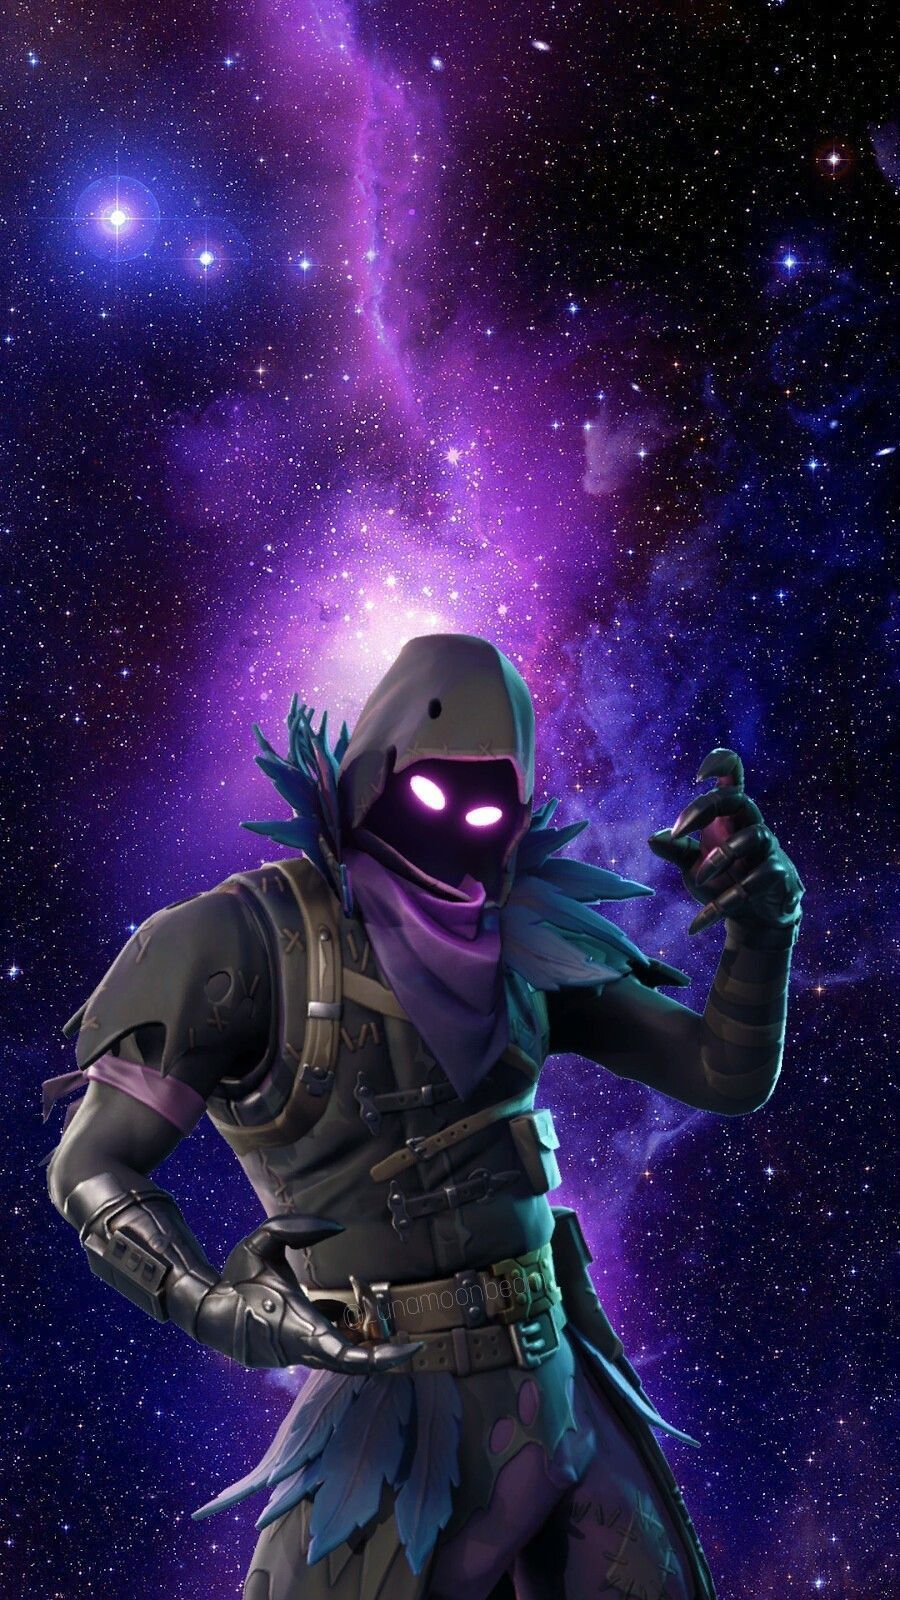 A man in purple and black with glowing eyes - Fortnite